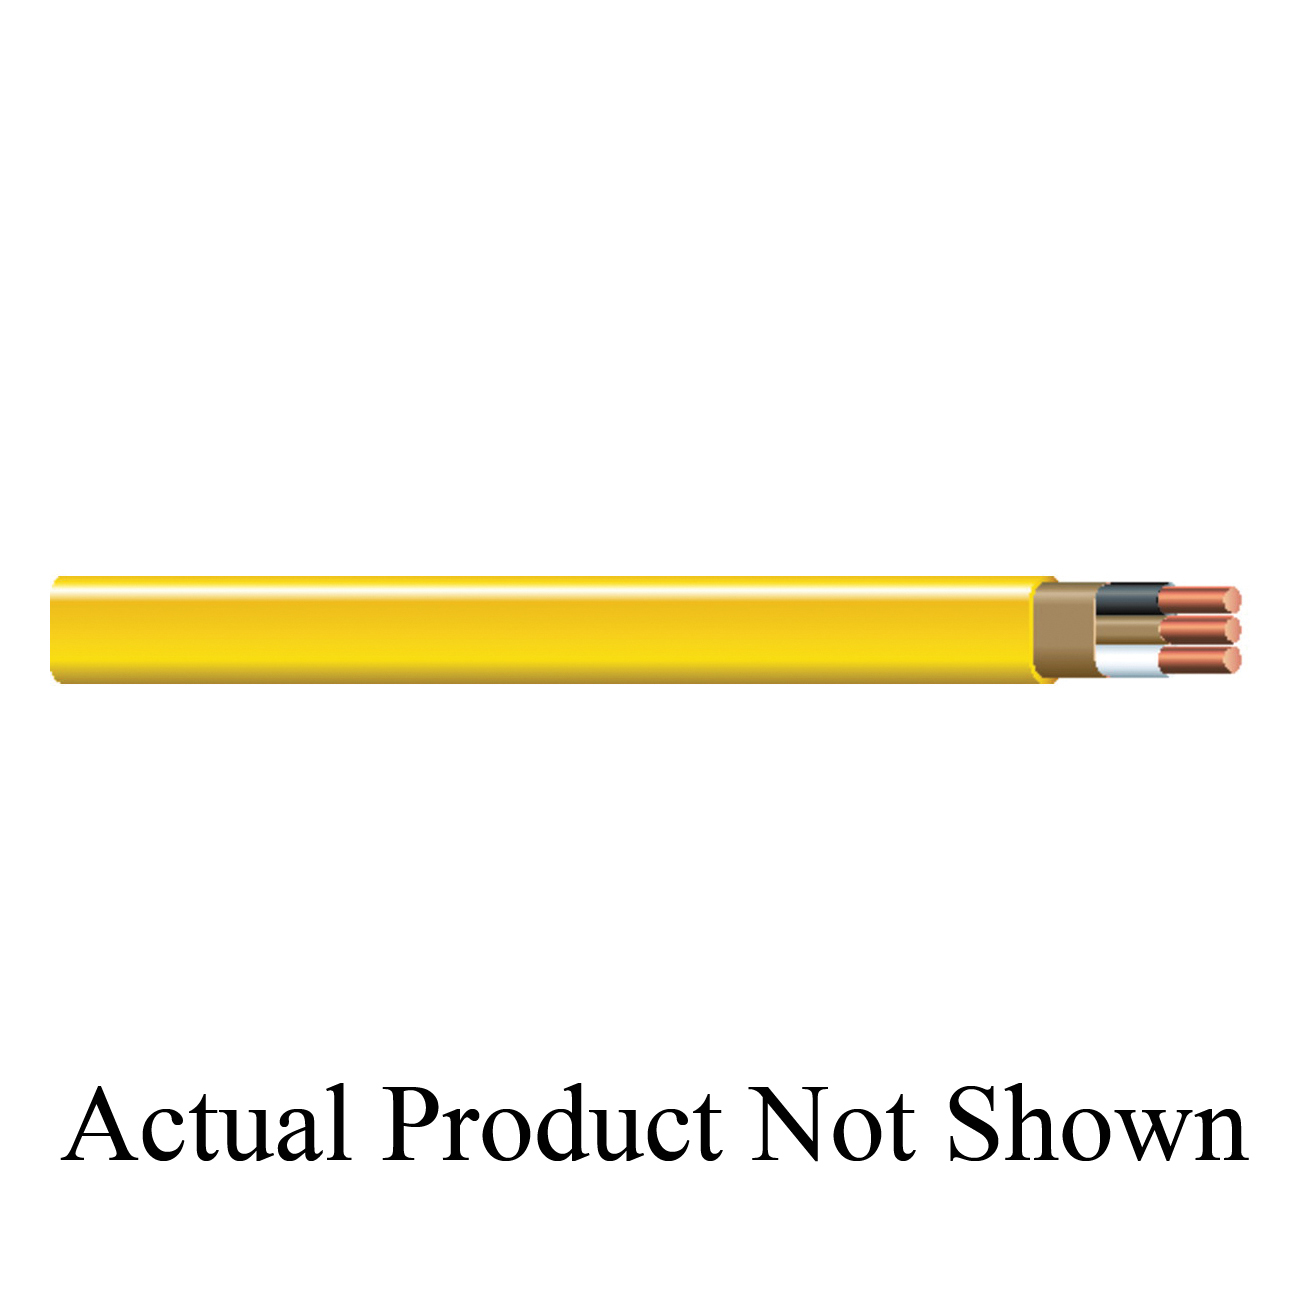 Romex® NM-B Series RX62WG500 Non-Metallic Sheathed Cable, 600 V, 2-Conductor, Stranded, 500 ft L, Black Jacket